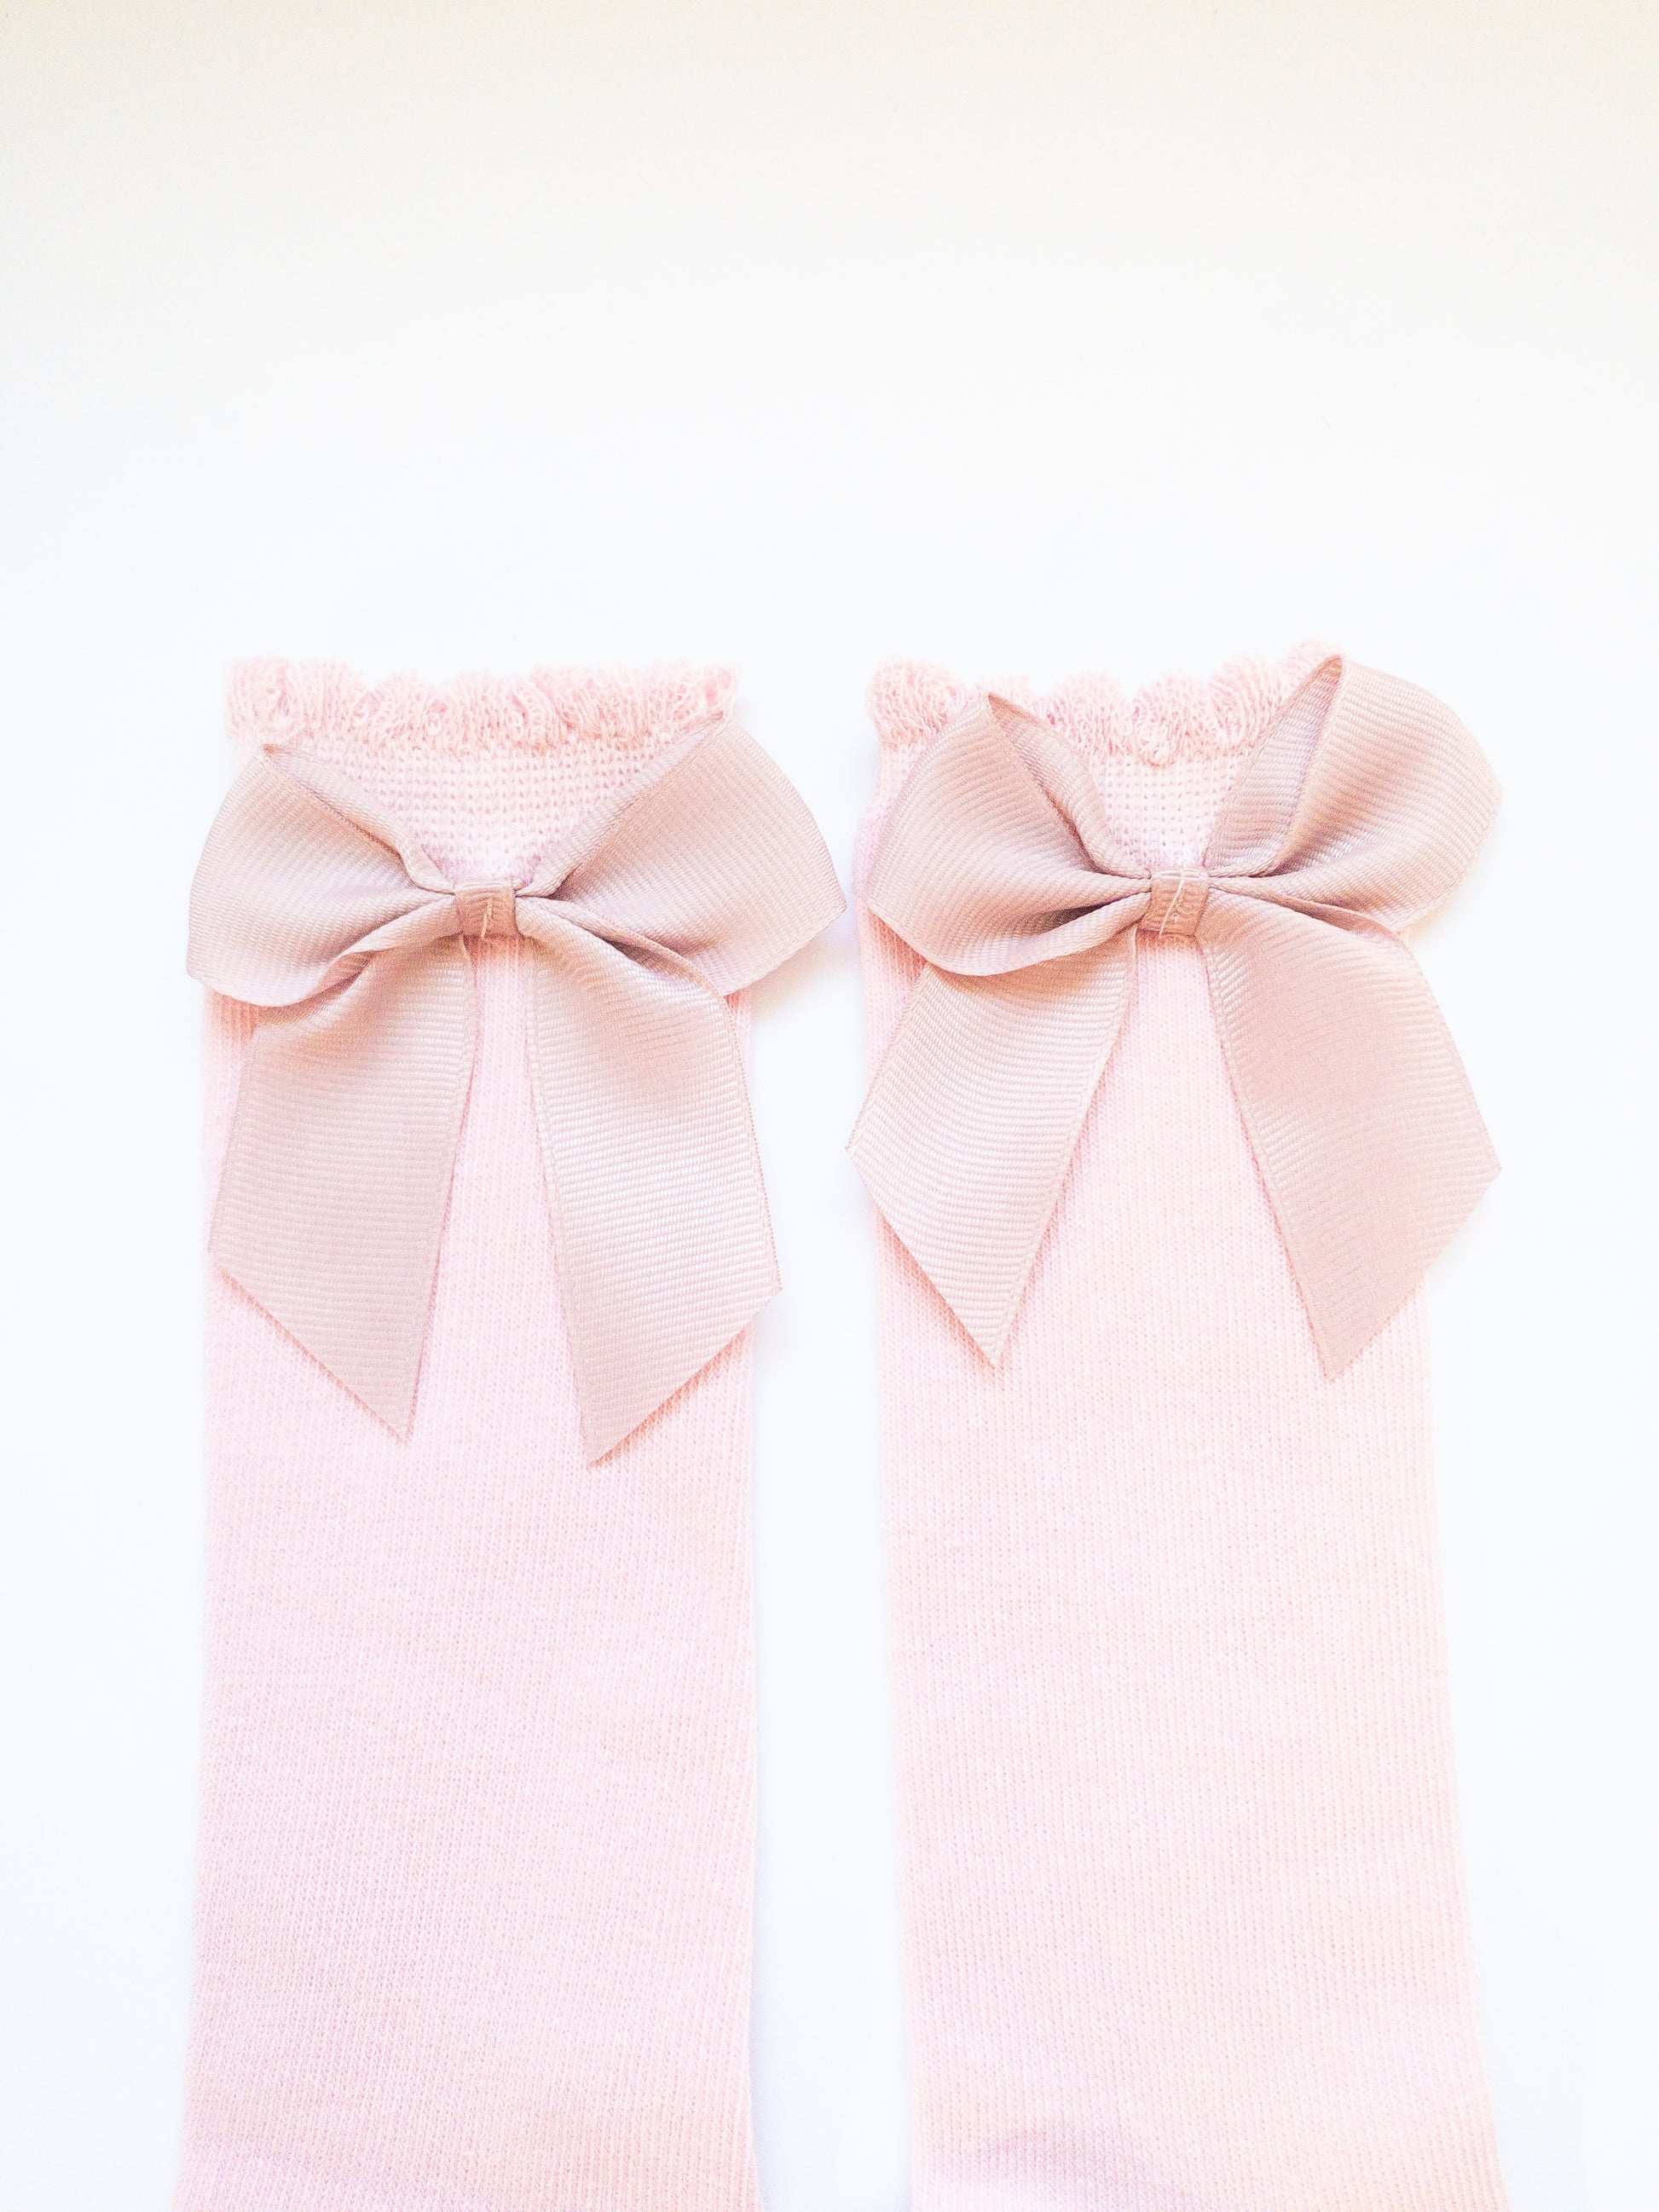 A sweet pair of kids knee high socks in a pretty pink with a dusty pink bow on each sock. The ruffled detail makes the socks even sweeter.